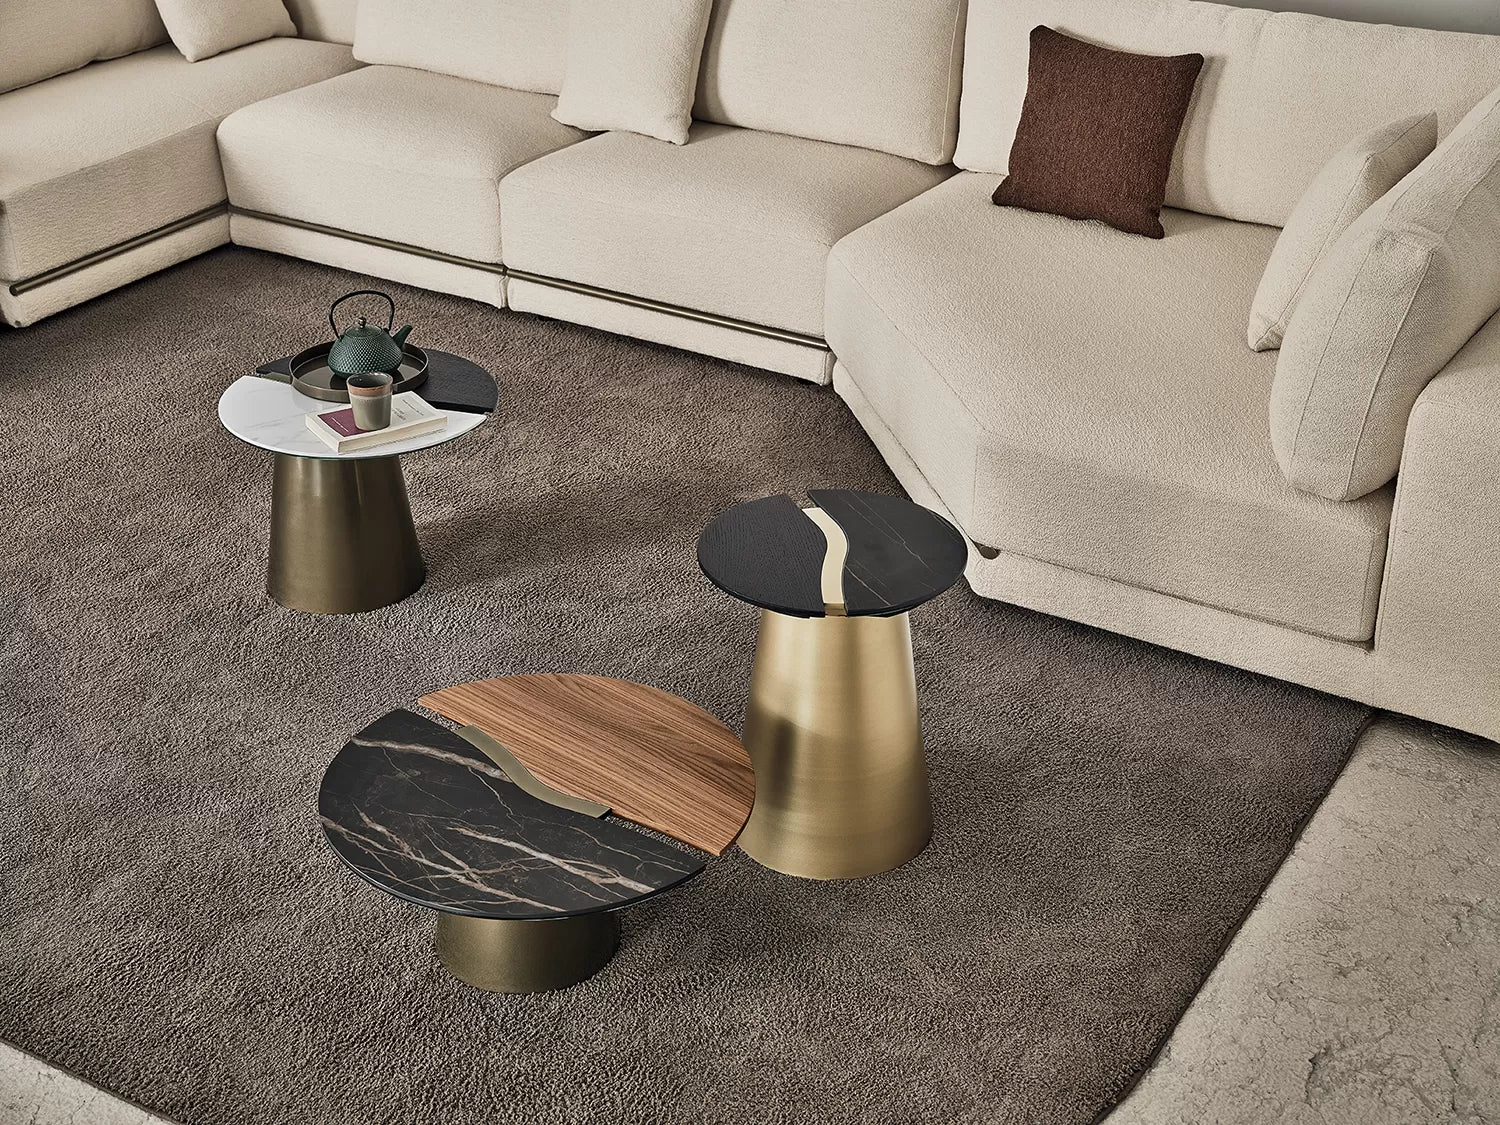 Yang Coffee Table With Metal Frame And Decorative Details 08 22